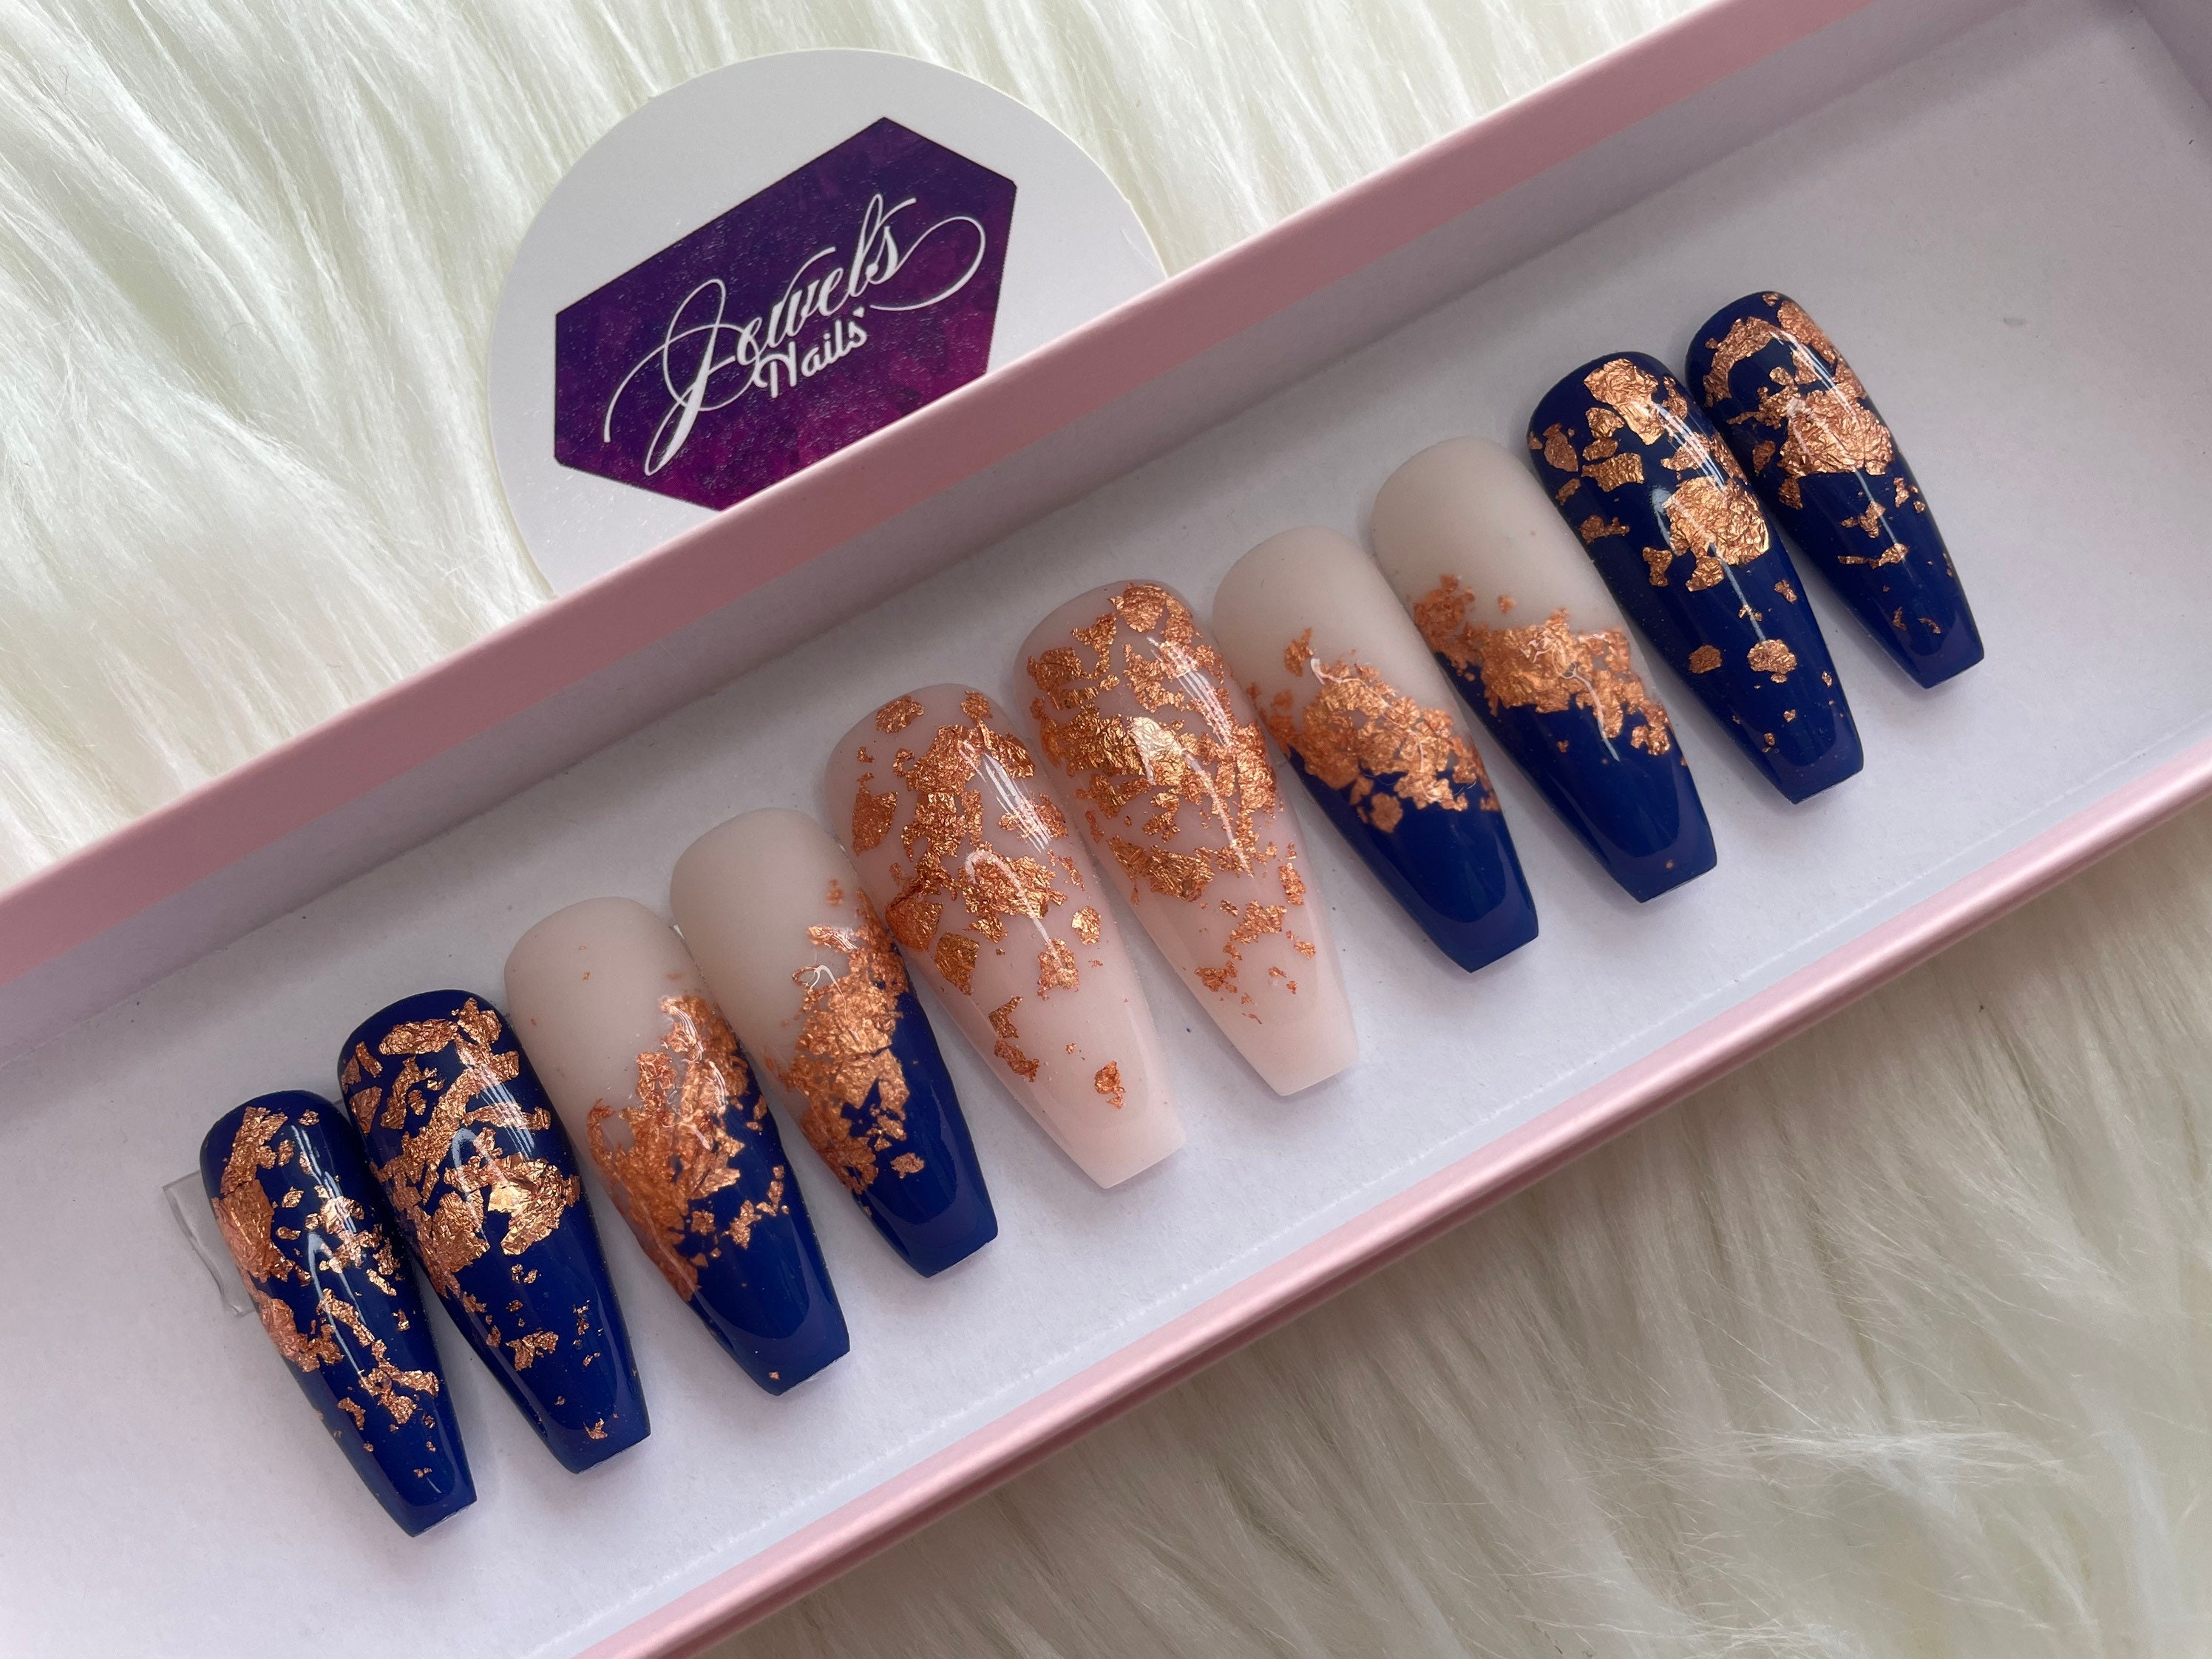 Eye Candy Nails & Training - Navy blue gel polish with gold stencil rose  nail art by Elaine Moore on 12 January 2018 at 02:02